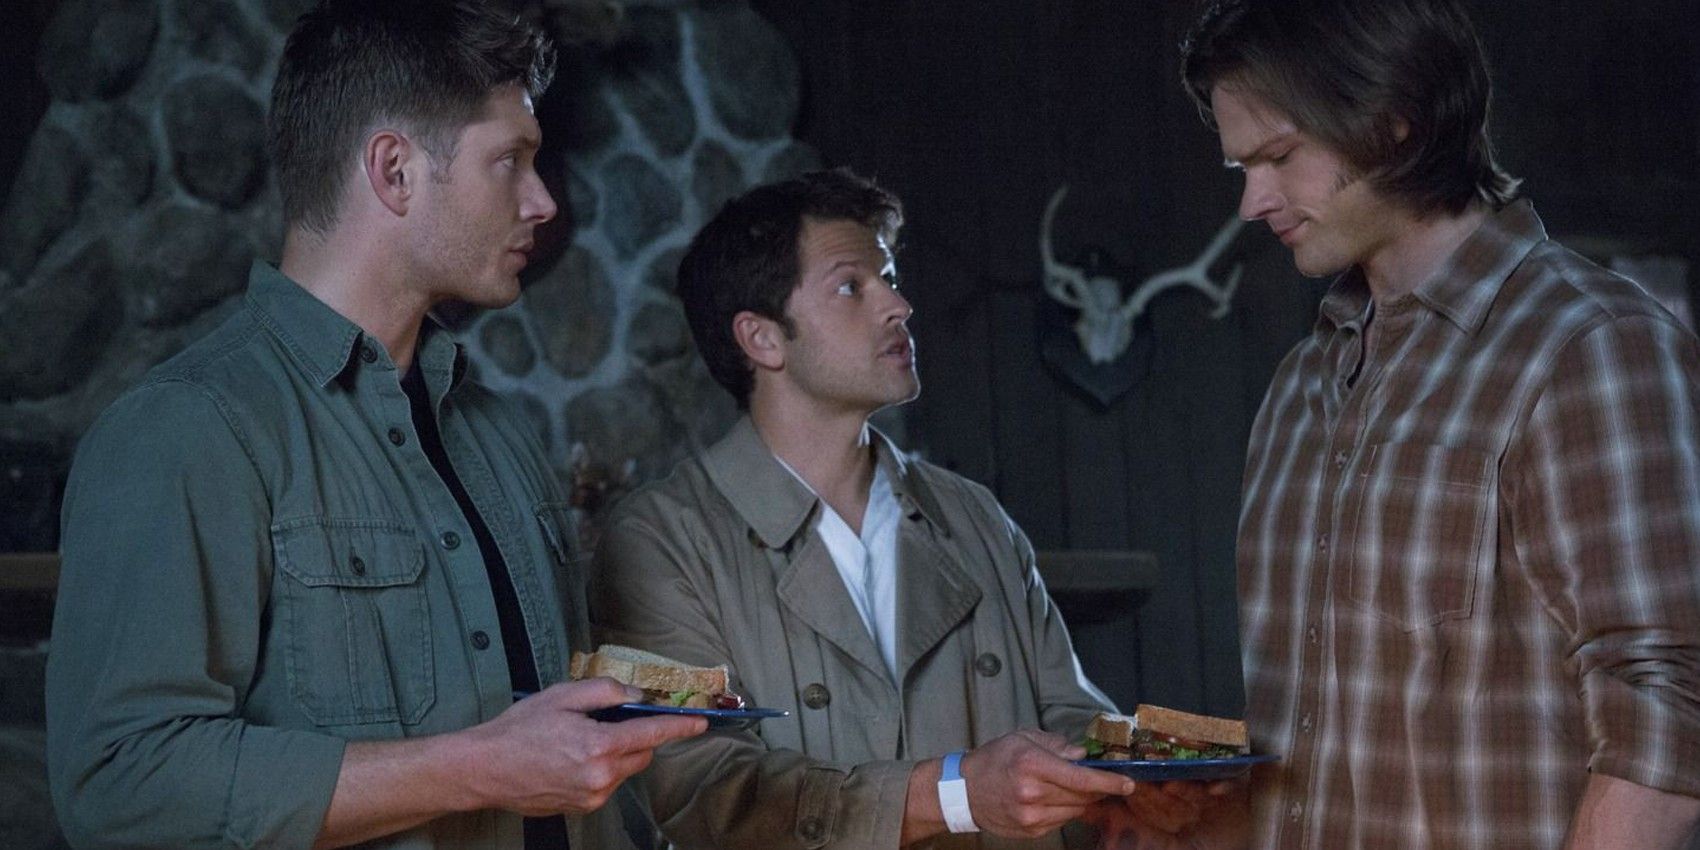 Jensen Ackles as Dean Winchester, Misha Collins as Castiel and Jared Padalecki as Sam in Supernatural